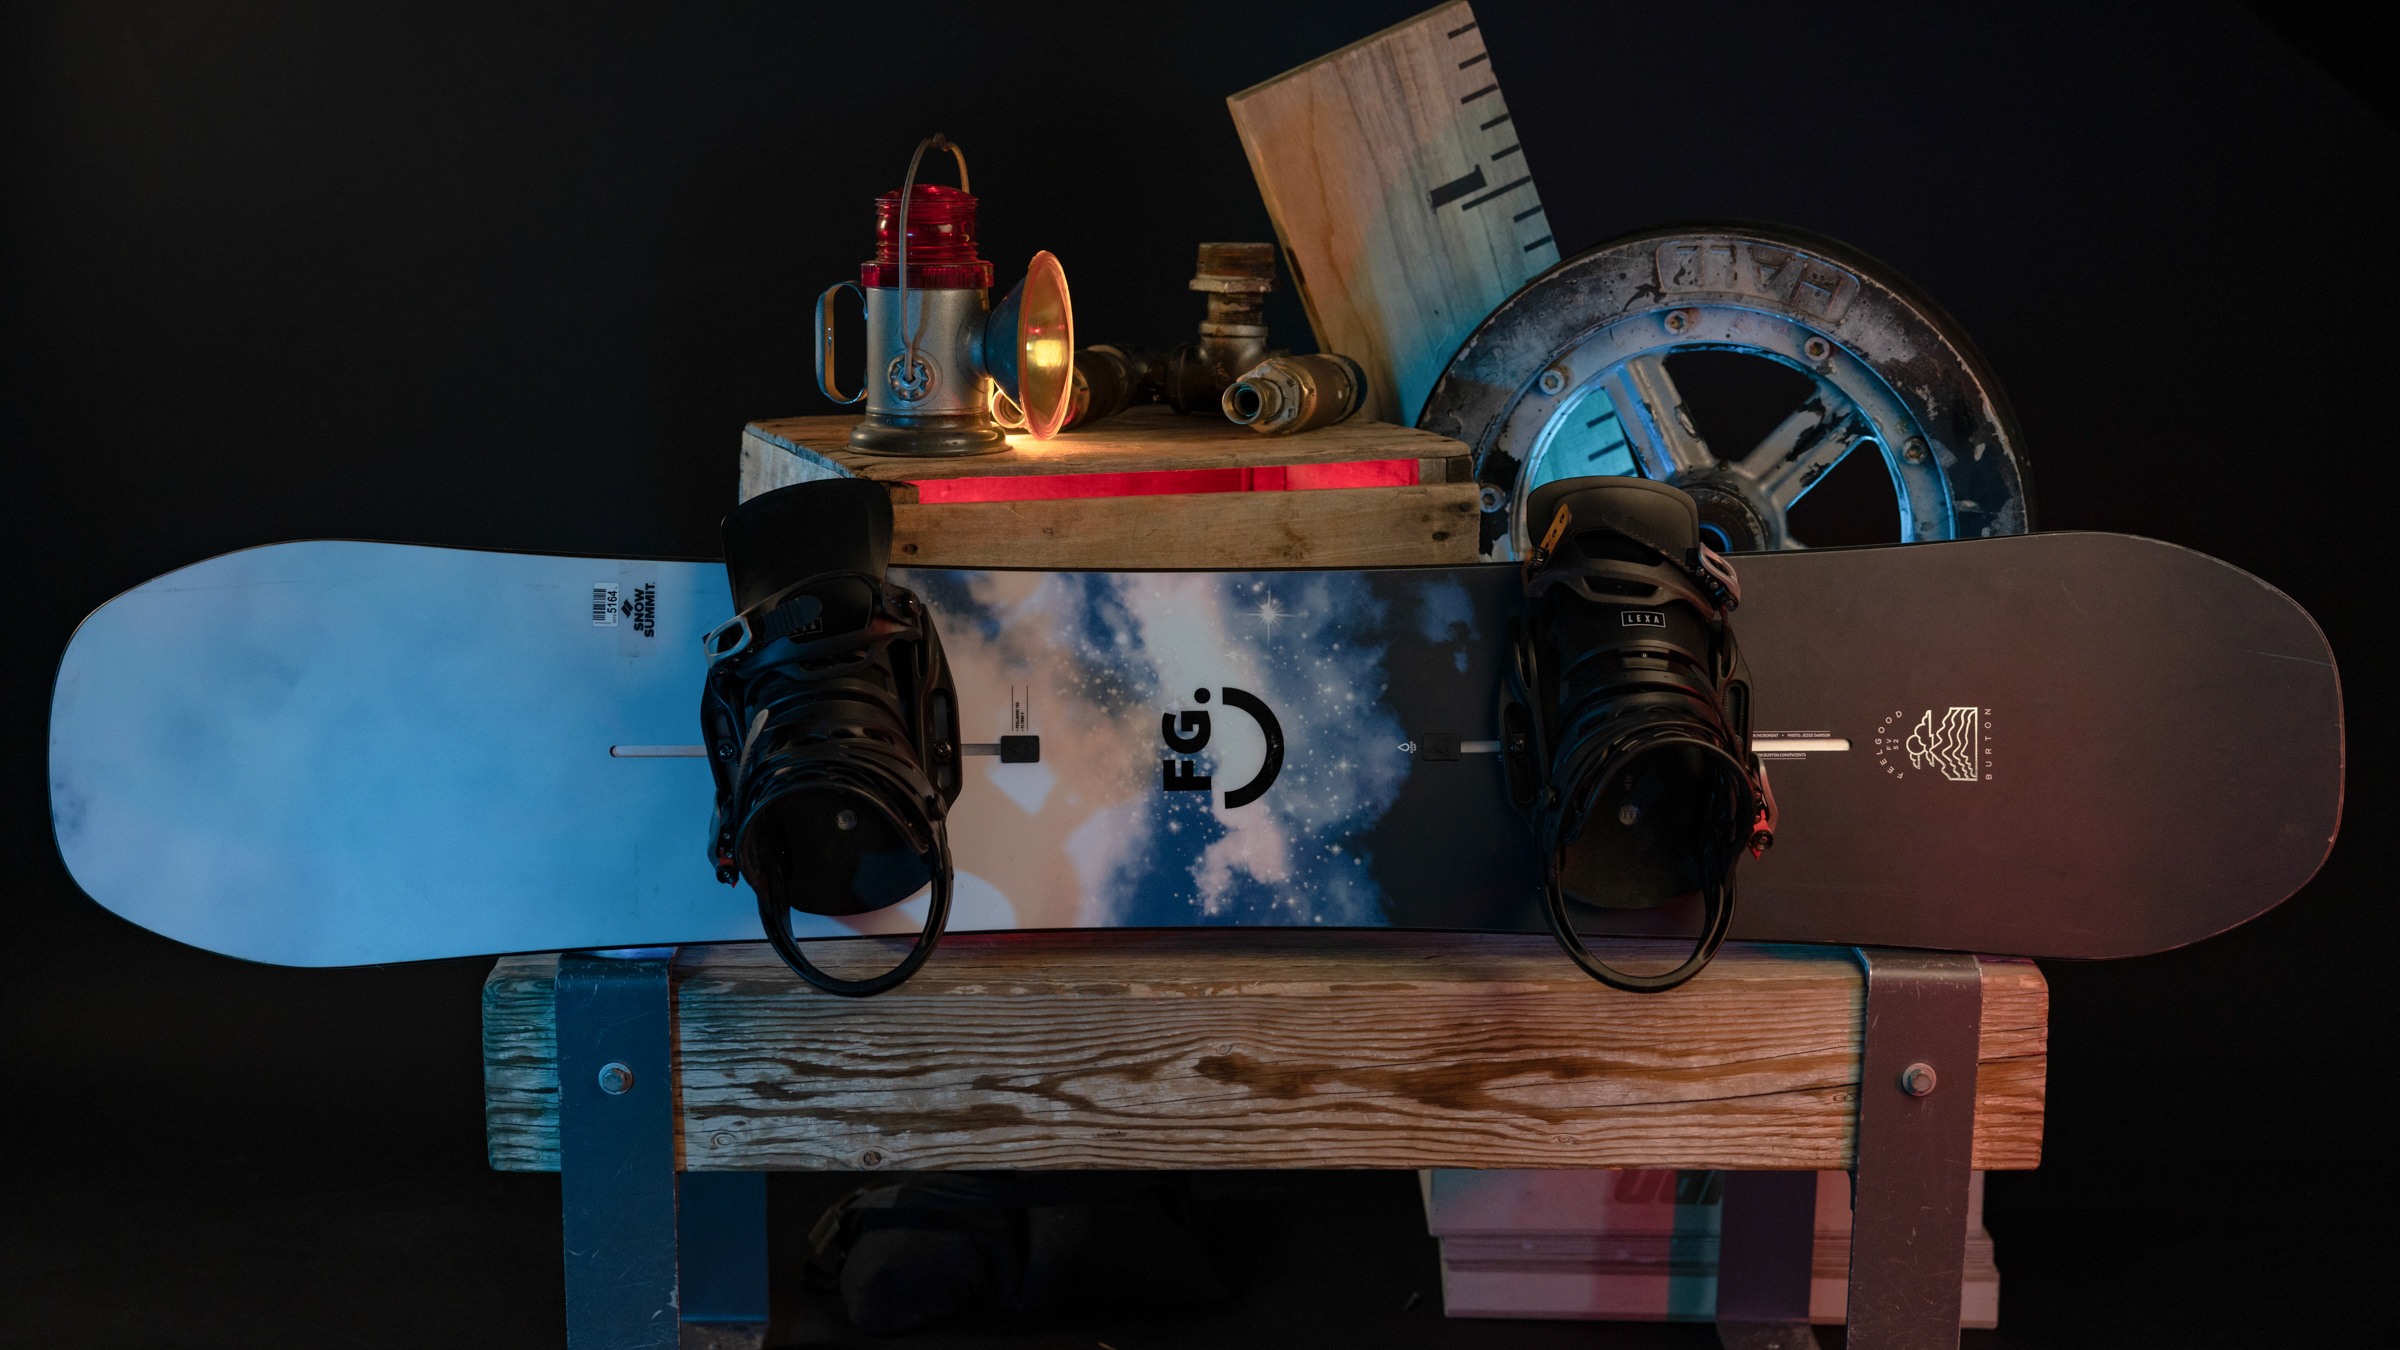 Snowboard with bindings displayed against wooden box